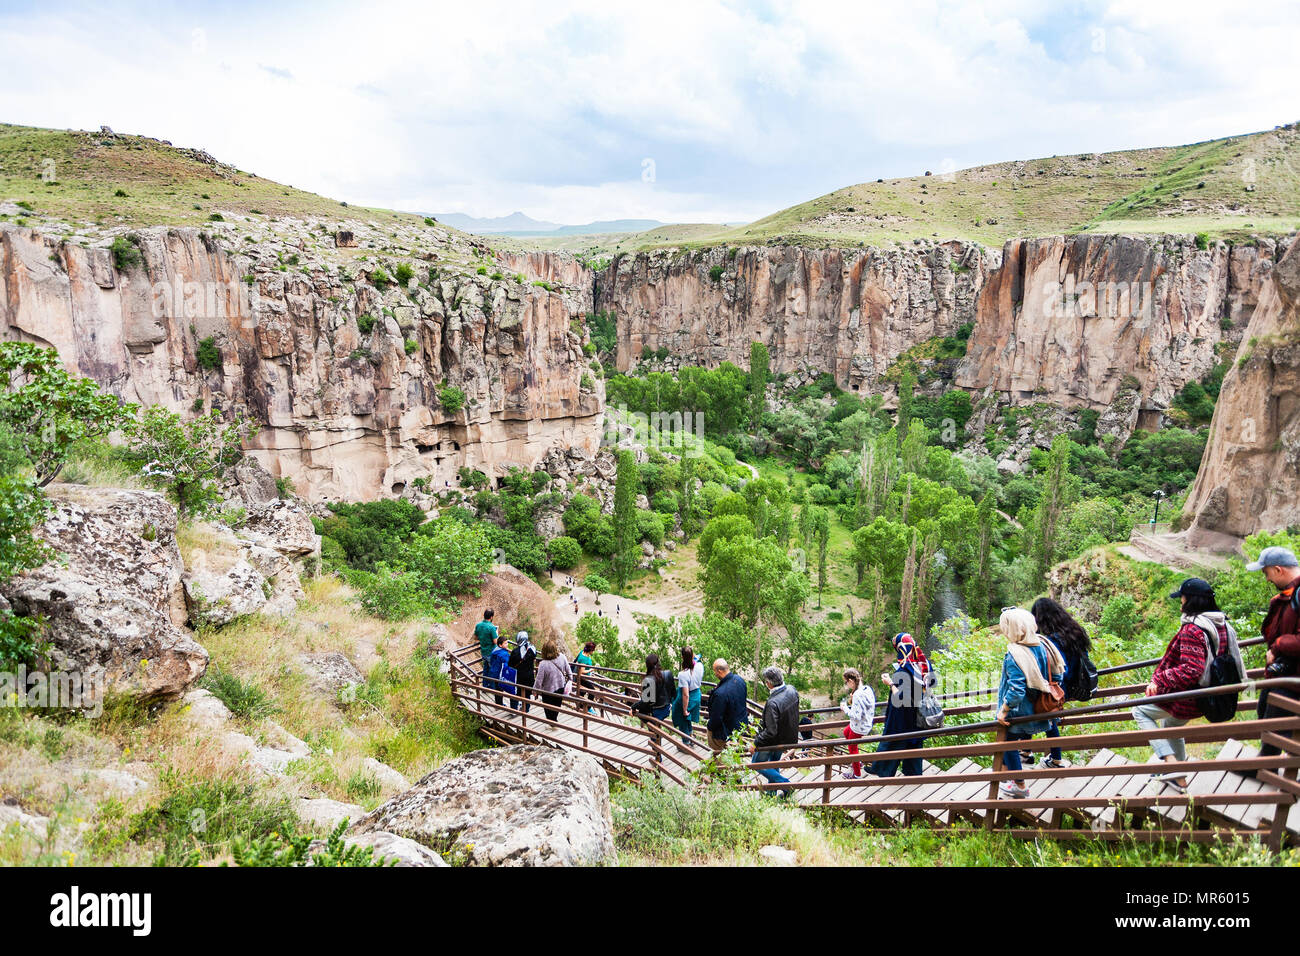 IHLARA VALLEY, TURKEY - MAY 6, 2018: visitors walk to Ihlara Valley in Aksaray Province. Ihlara Valley is 16 km long gorge, it is the most famous vall Stock Photo